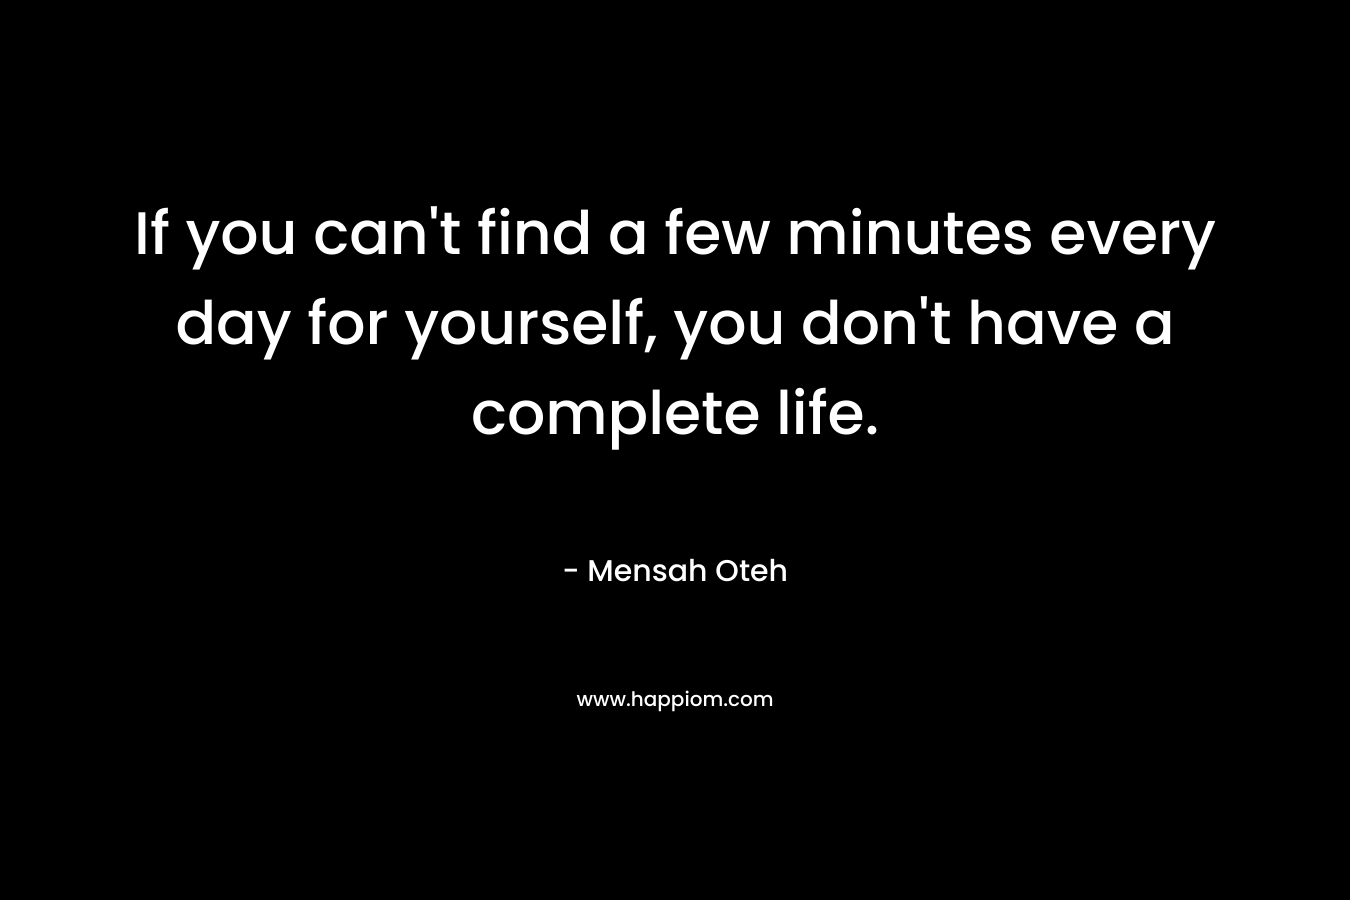 If you can’t find a few minutes every day for yourself, you don’t have a complete life. – Mensah Oteh